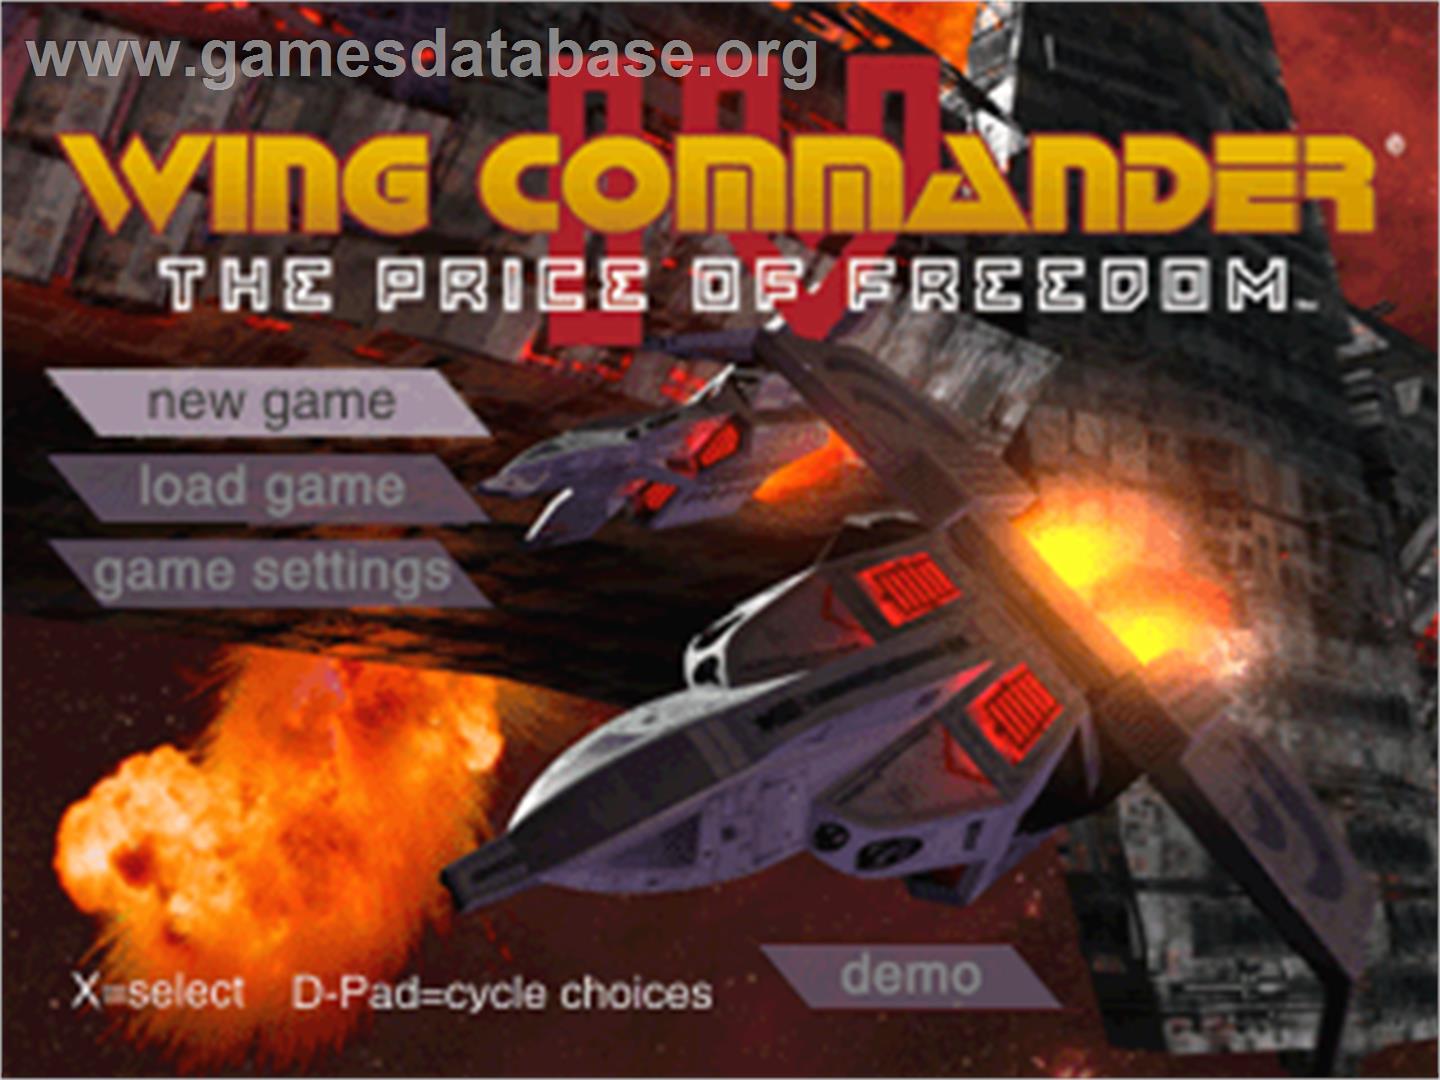 Wing Commander IV: The Price of Freedom - Sony Playstation - Artwork - Title Screen